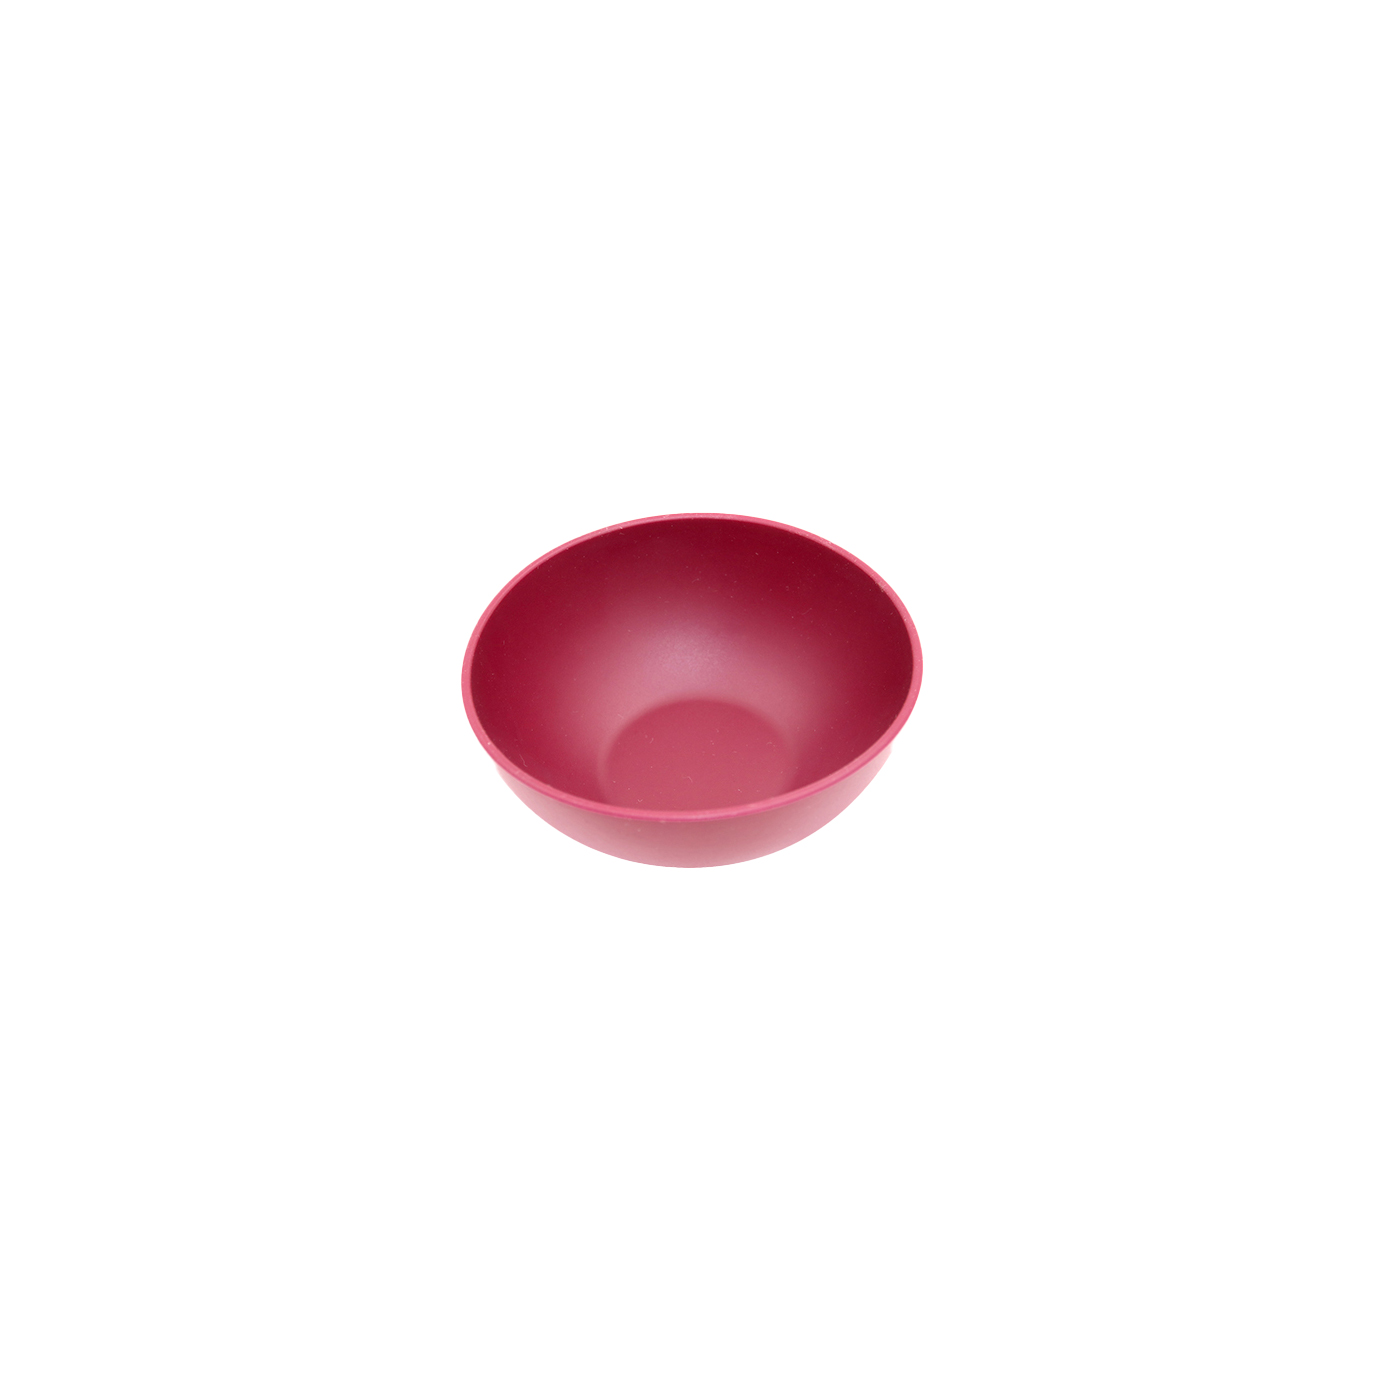 SV003 Round Bowl | Flexible Silicone Mixing Bowls